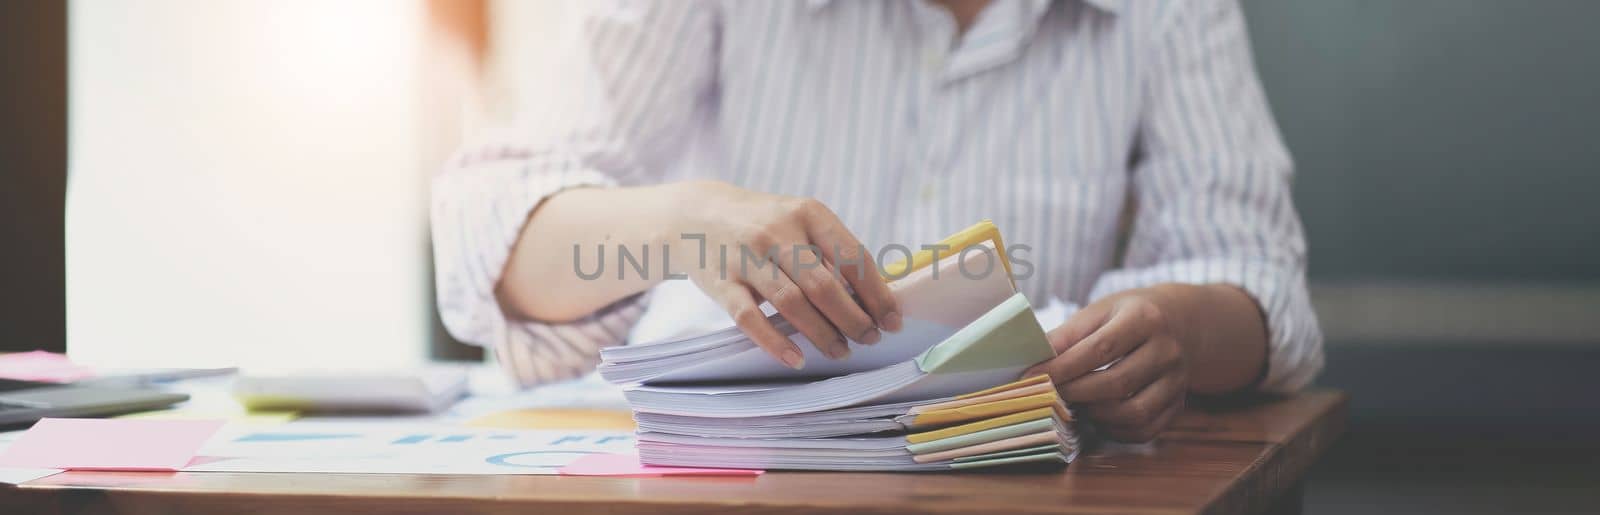 Business Documents, Auditor businesswoman checking searching document legal prepare paperwork or report for analysis TAX time,accountant Documents data contract partner deal in workplace office.